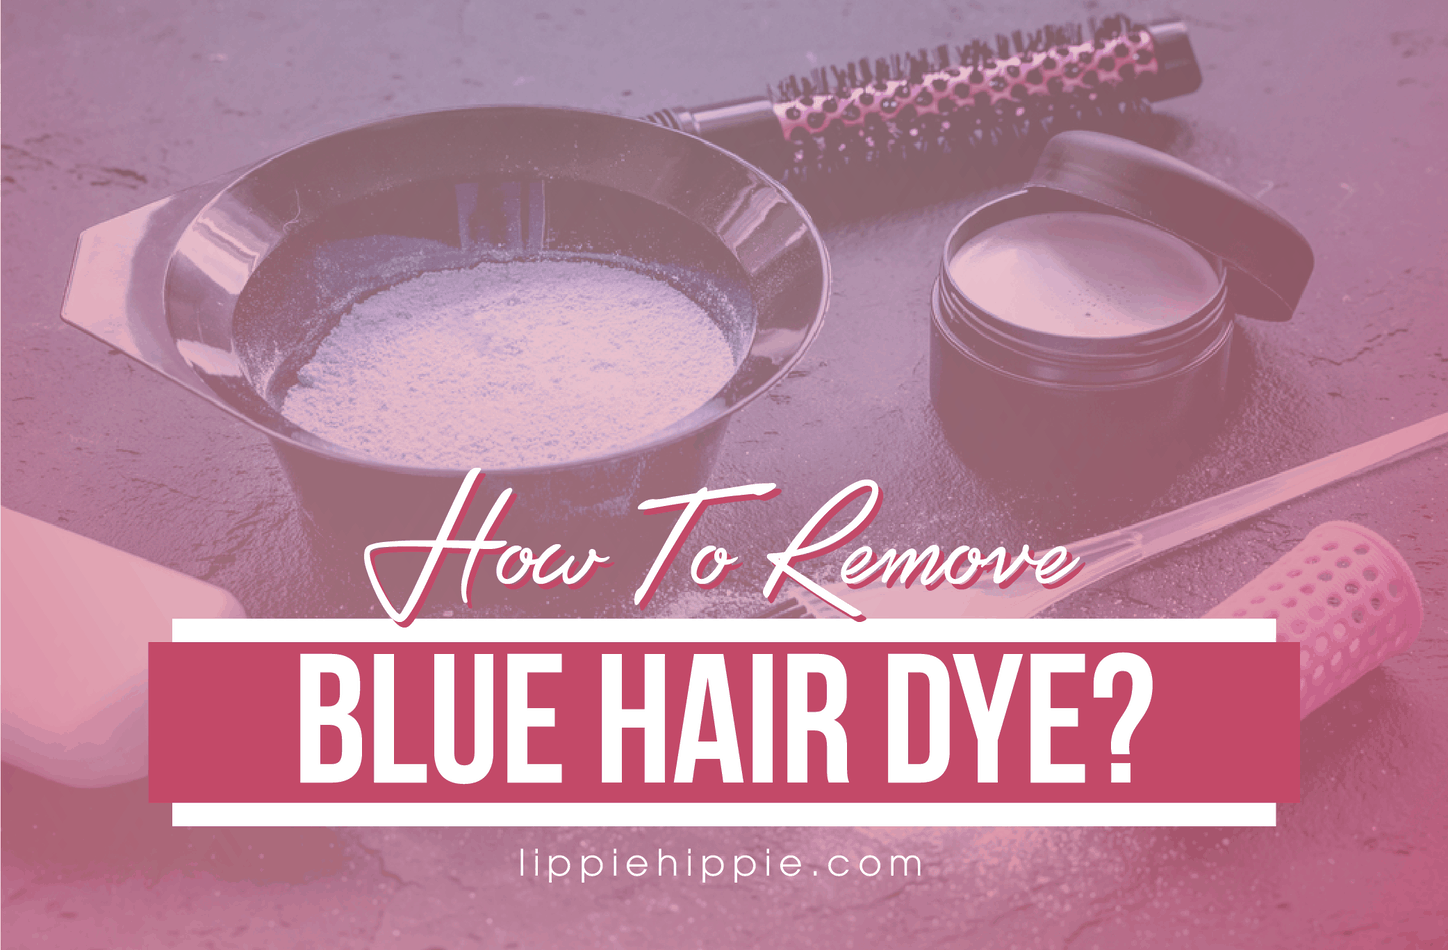 1. How to Remove Blue Hair Dye Without Bleach - wide 10